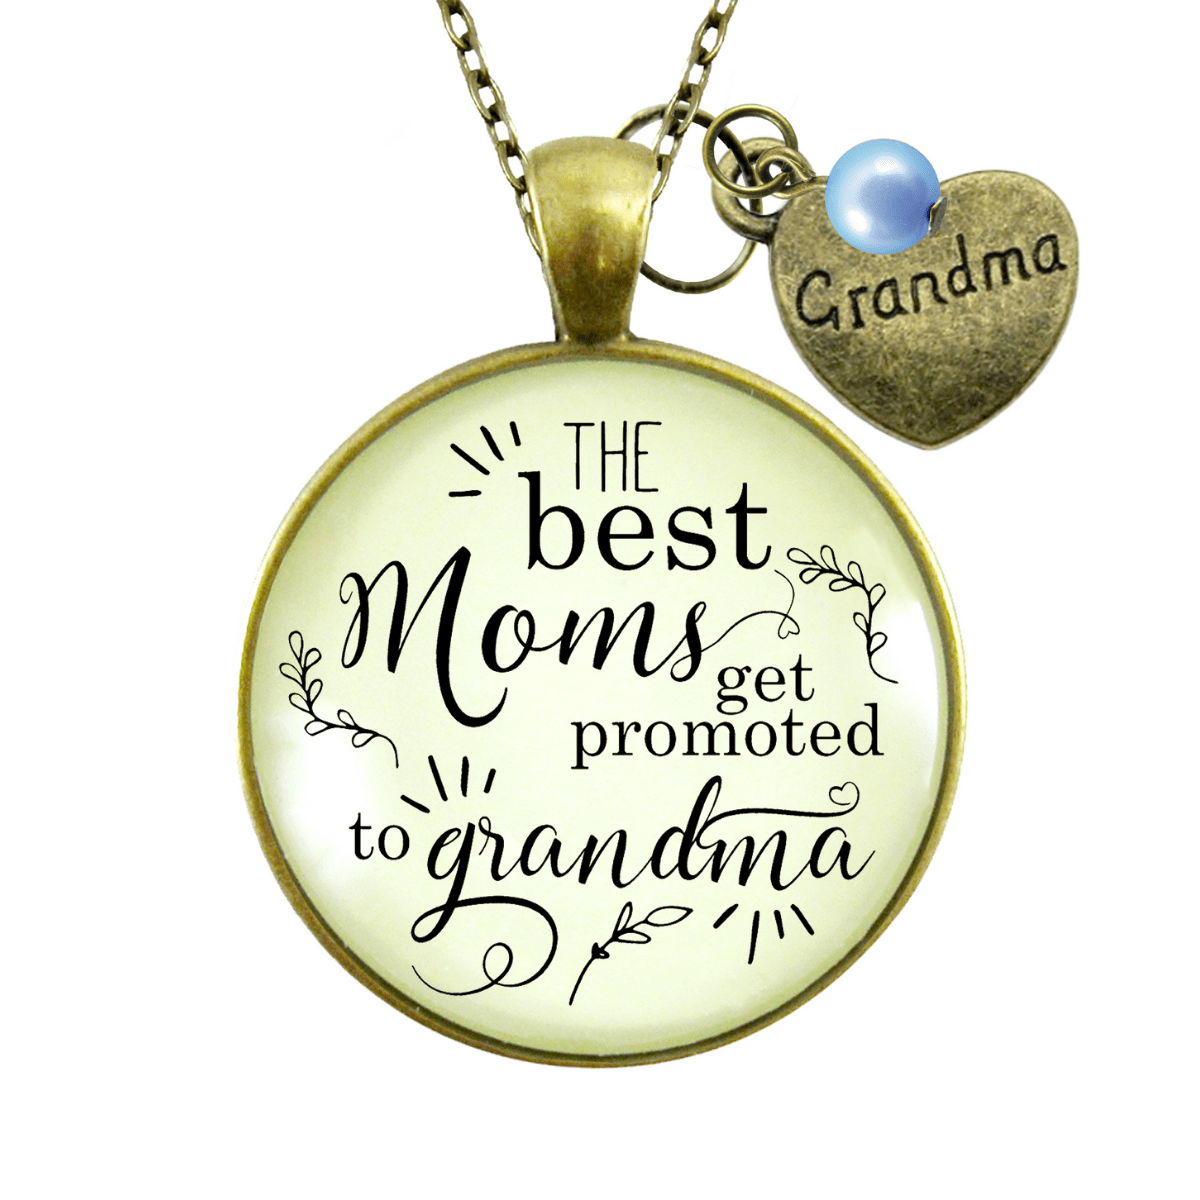 Gutsy Goodness Pregnancy Announcement Best Grandma Gender Reveal Necklace Gift Blue - Gutsy Goodness;Pregnancy Announcement Best Grandma Gender Reveal Necklace Gift Blue - Gutsy Goodness Handmade Jewelry Gifts